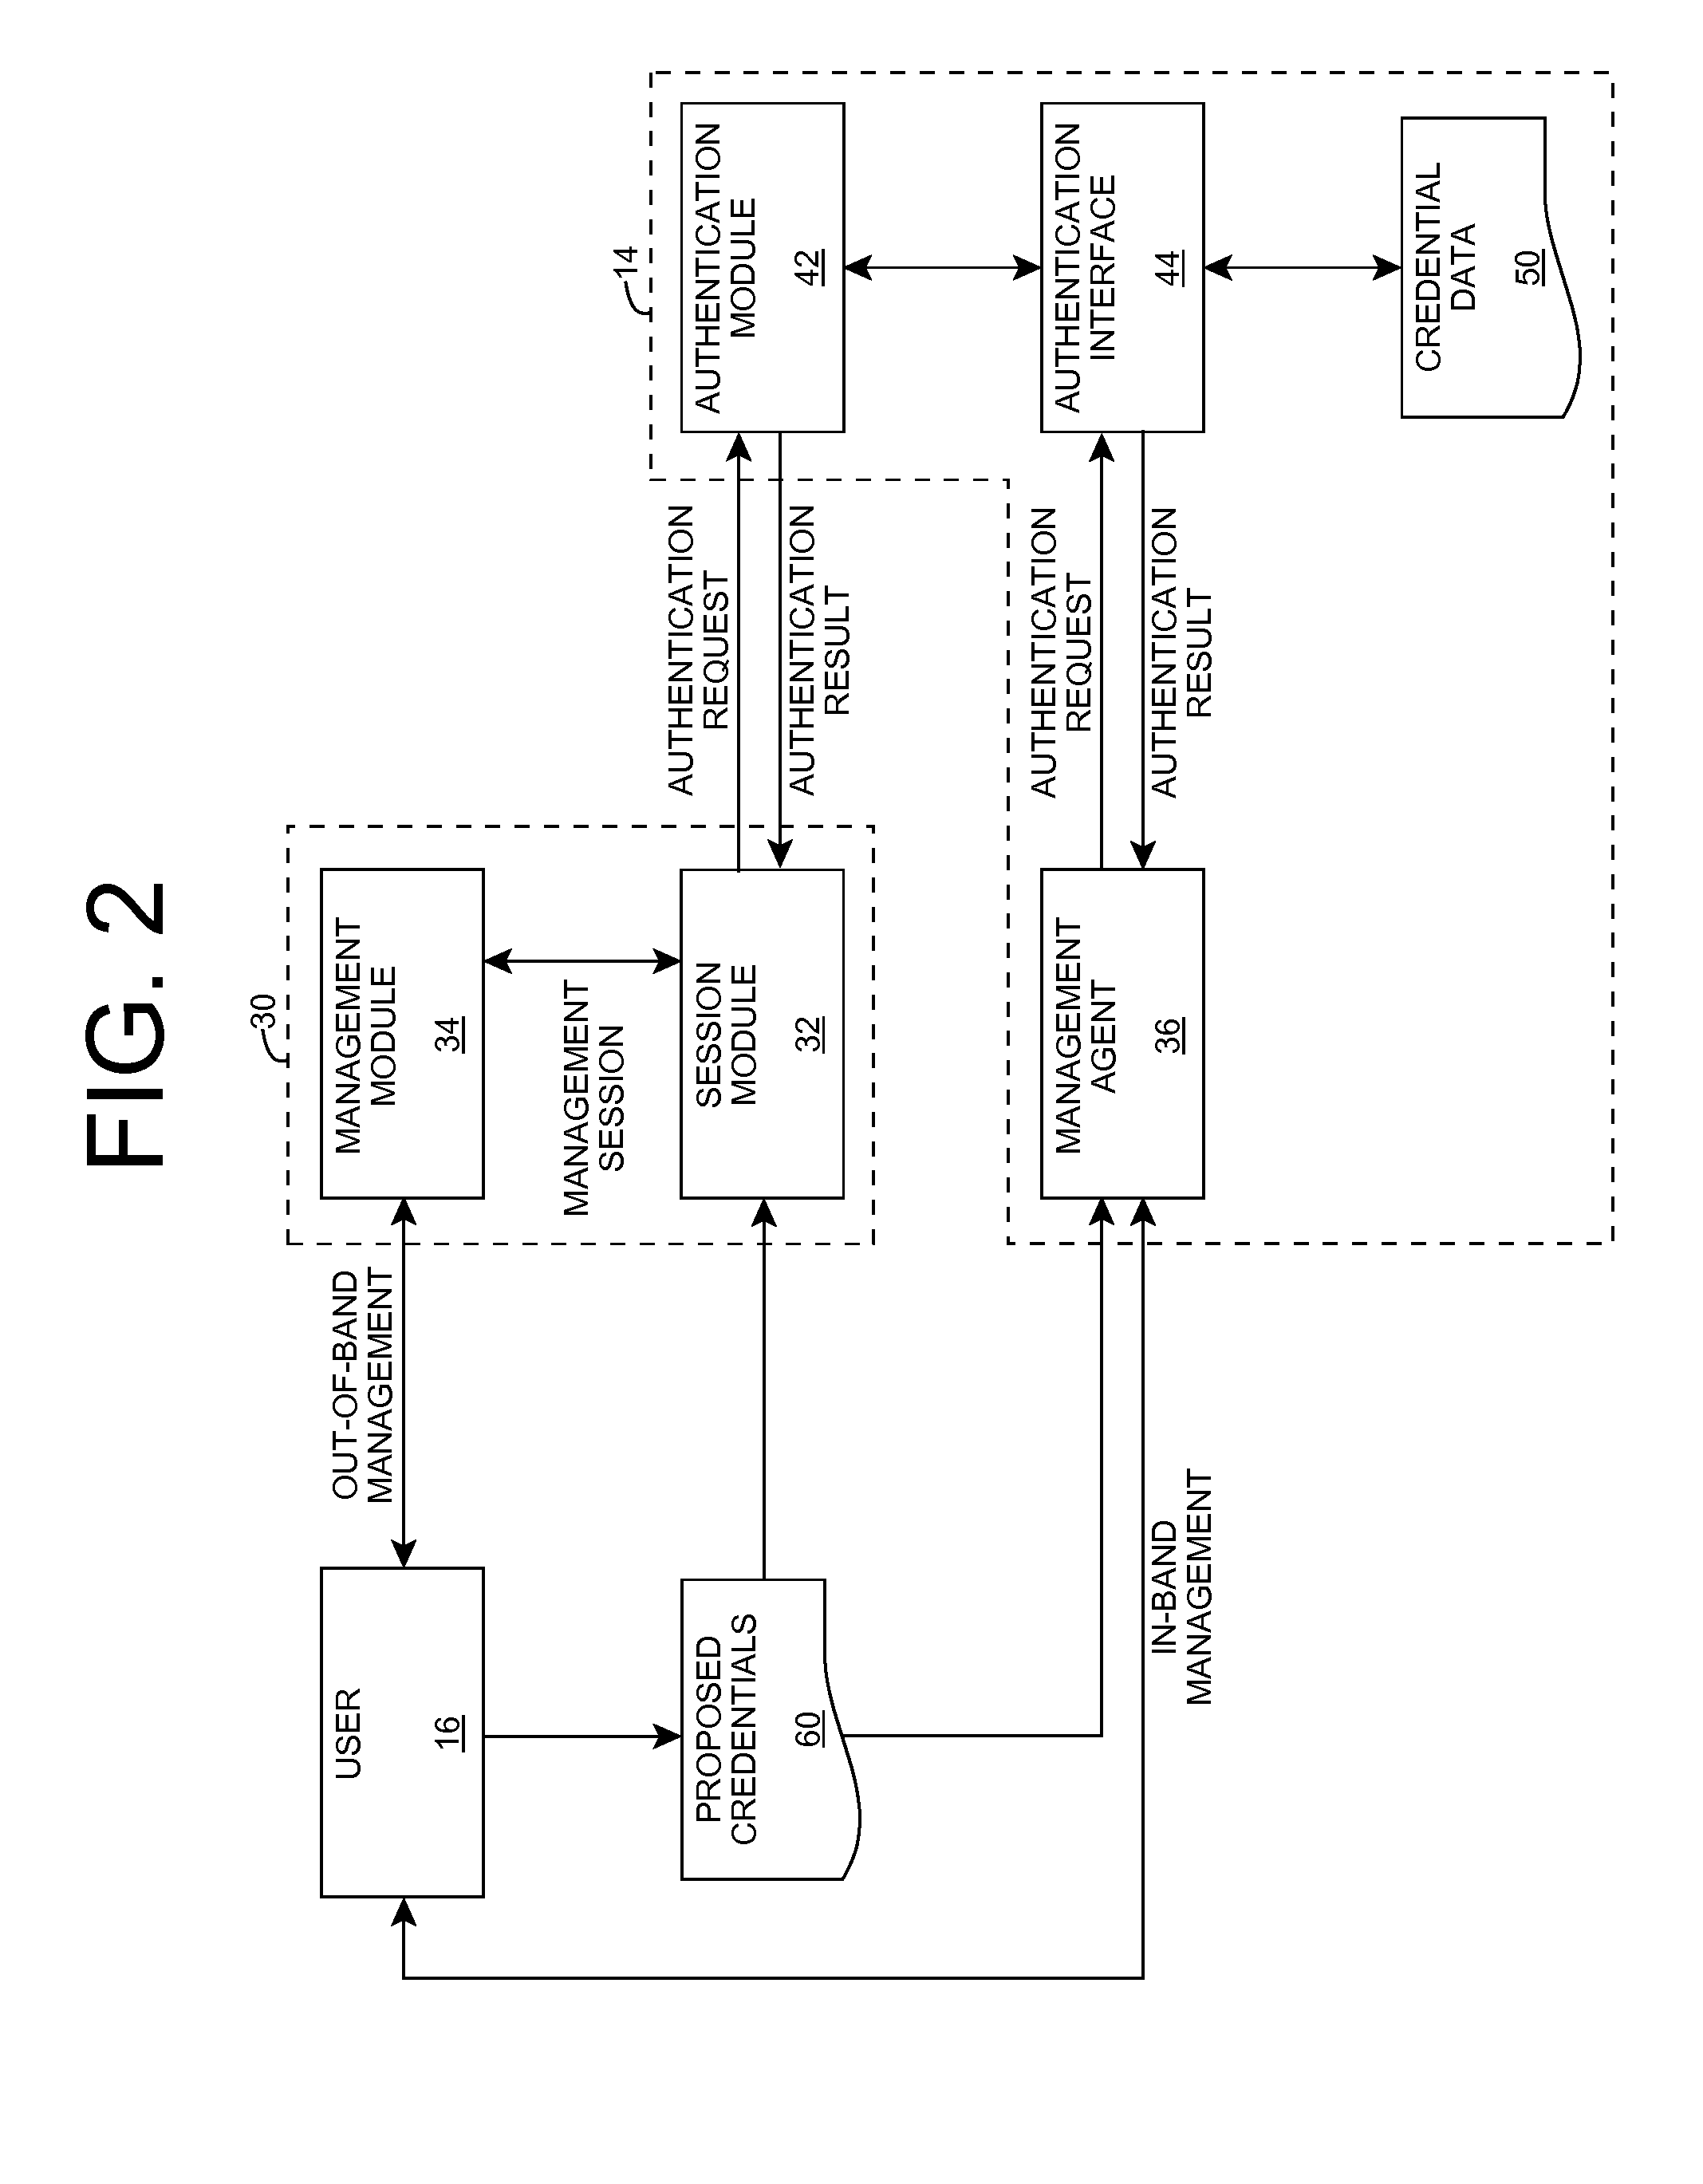 Authentication for computer system management